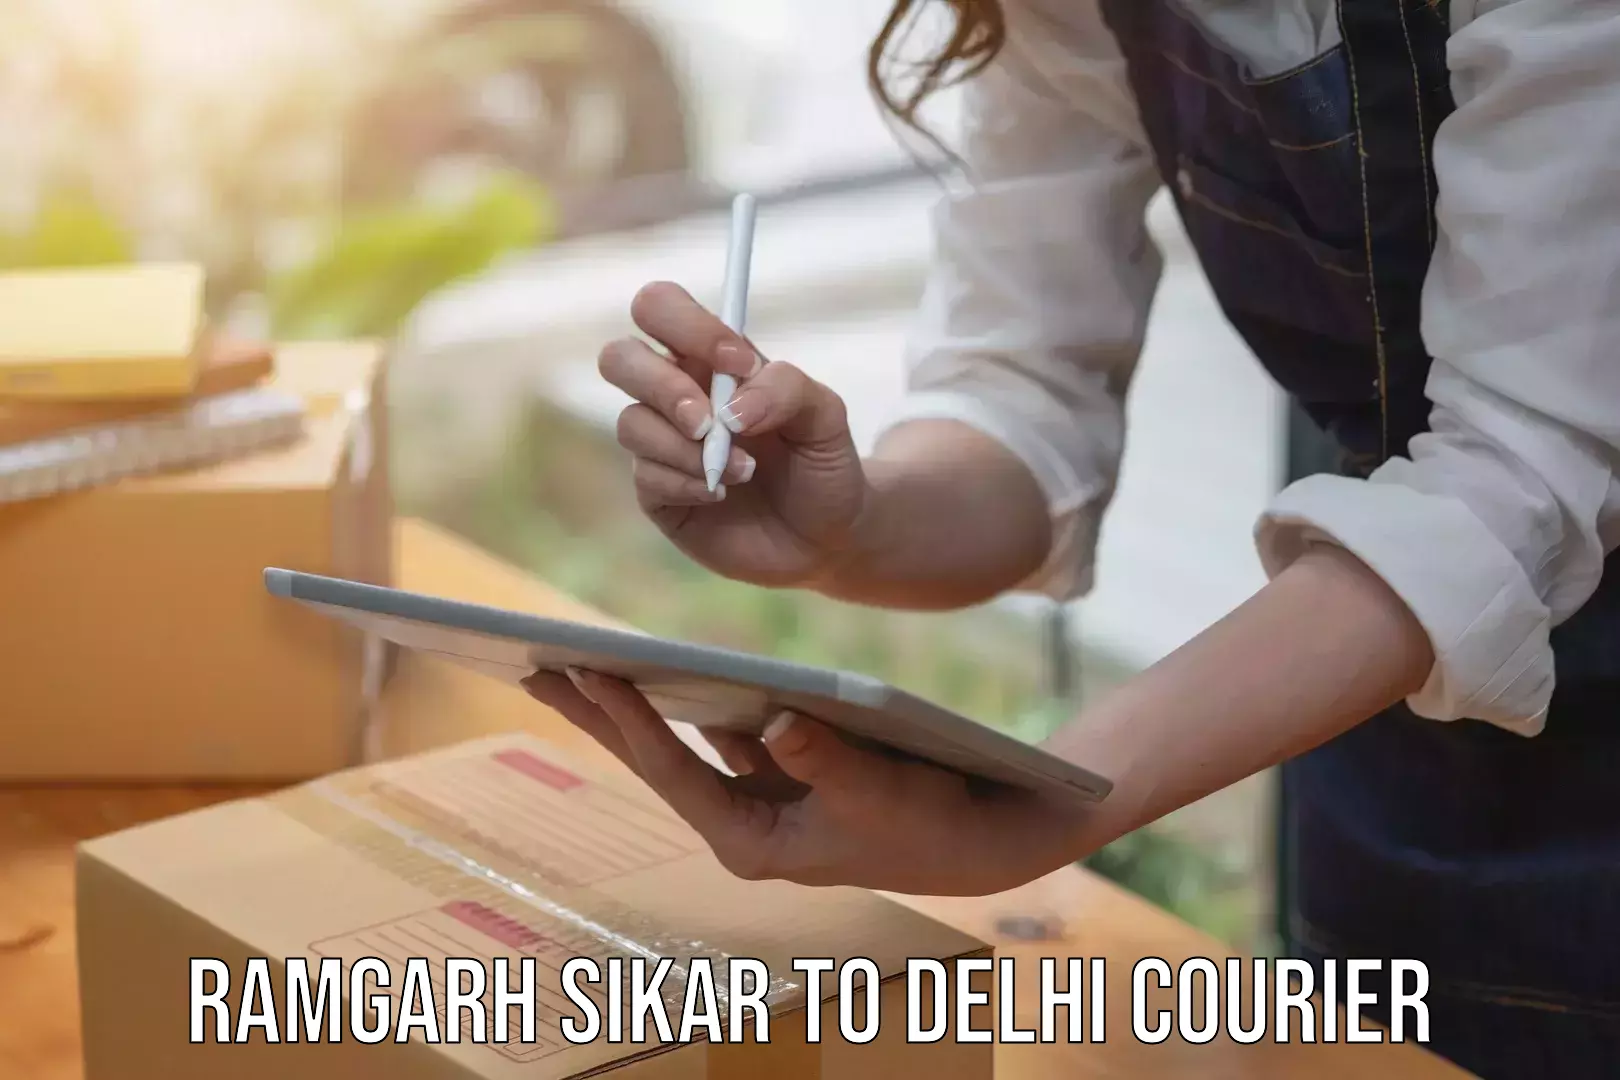 Courier service booking Ramgarh Sikar to NIT Delhi